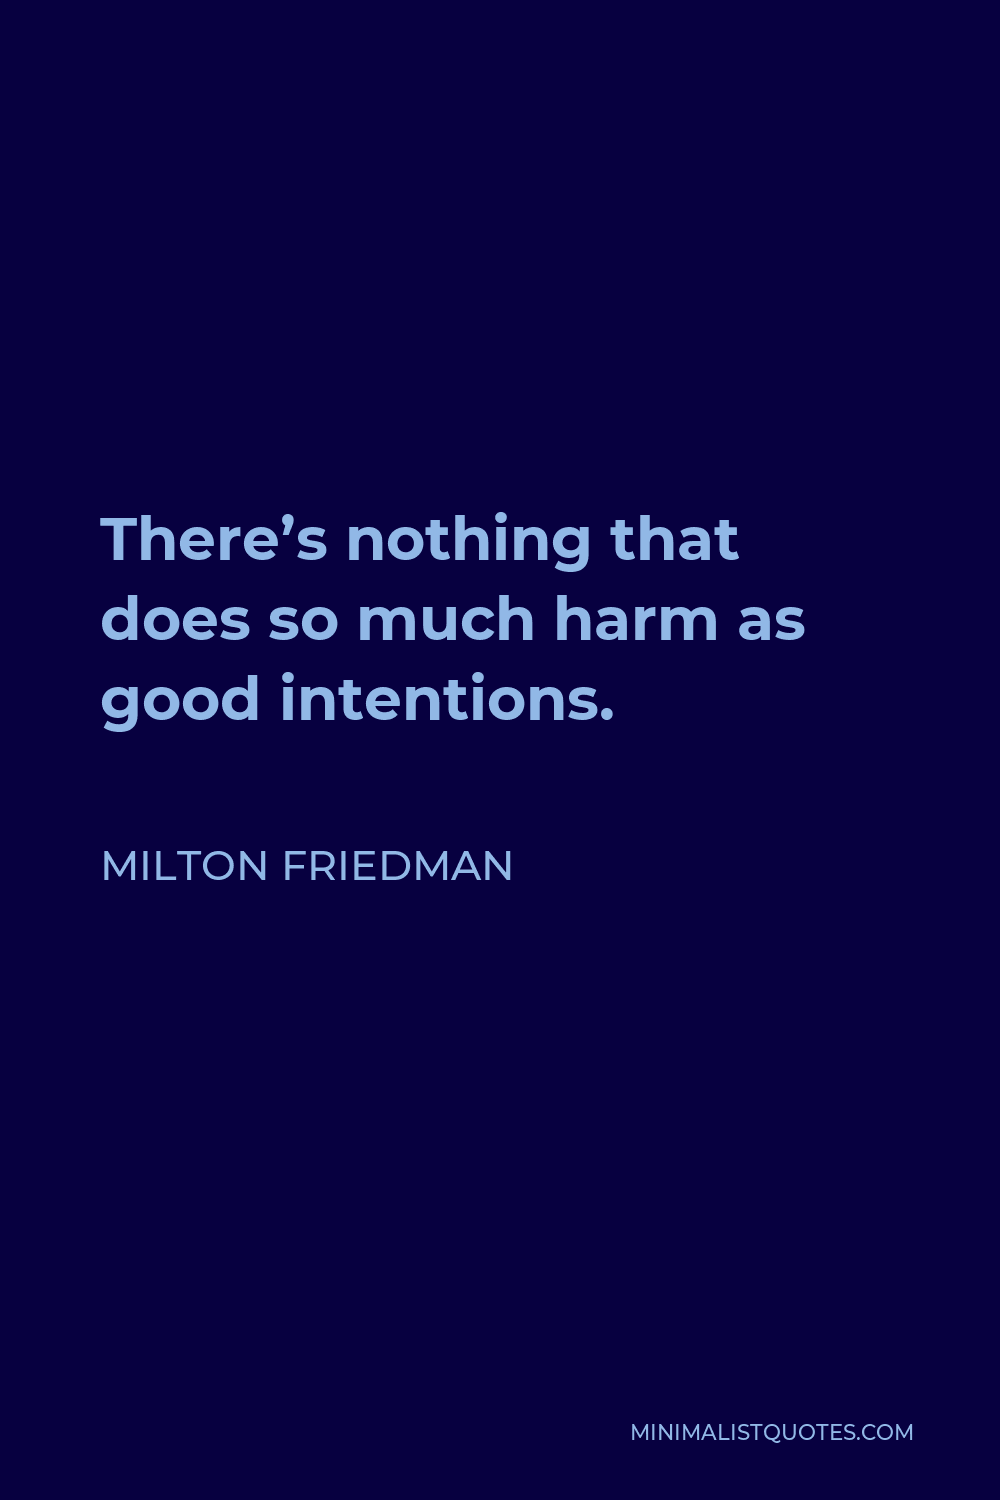 Milton Friedman Quote - There’s nothing that does so much harm as good intentions.